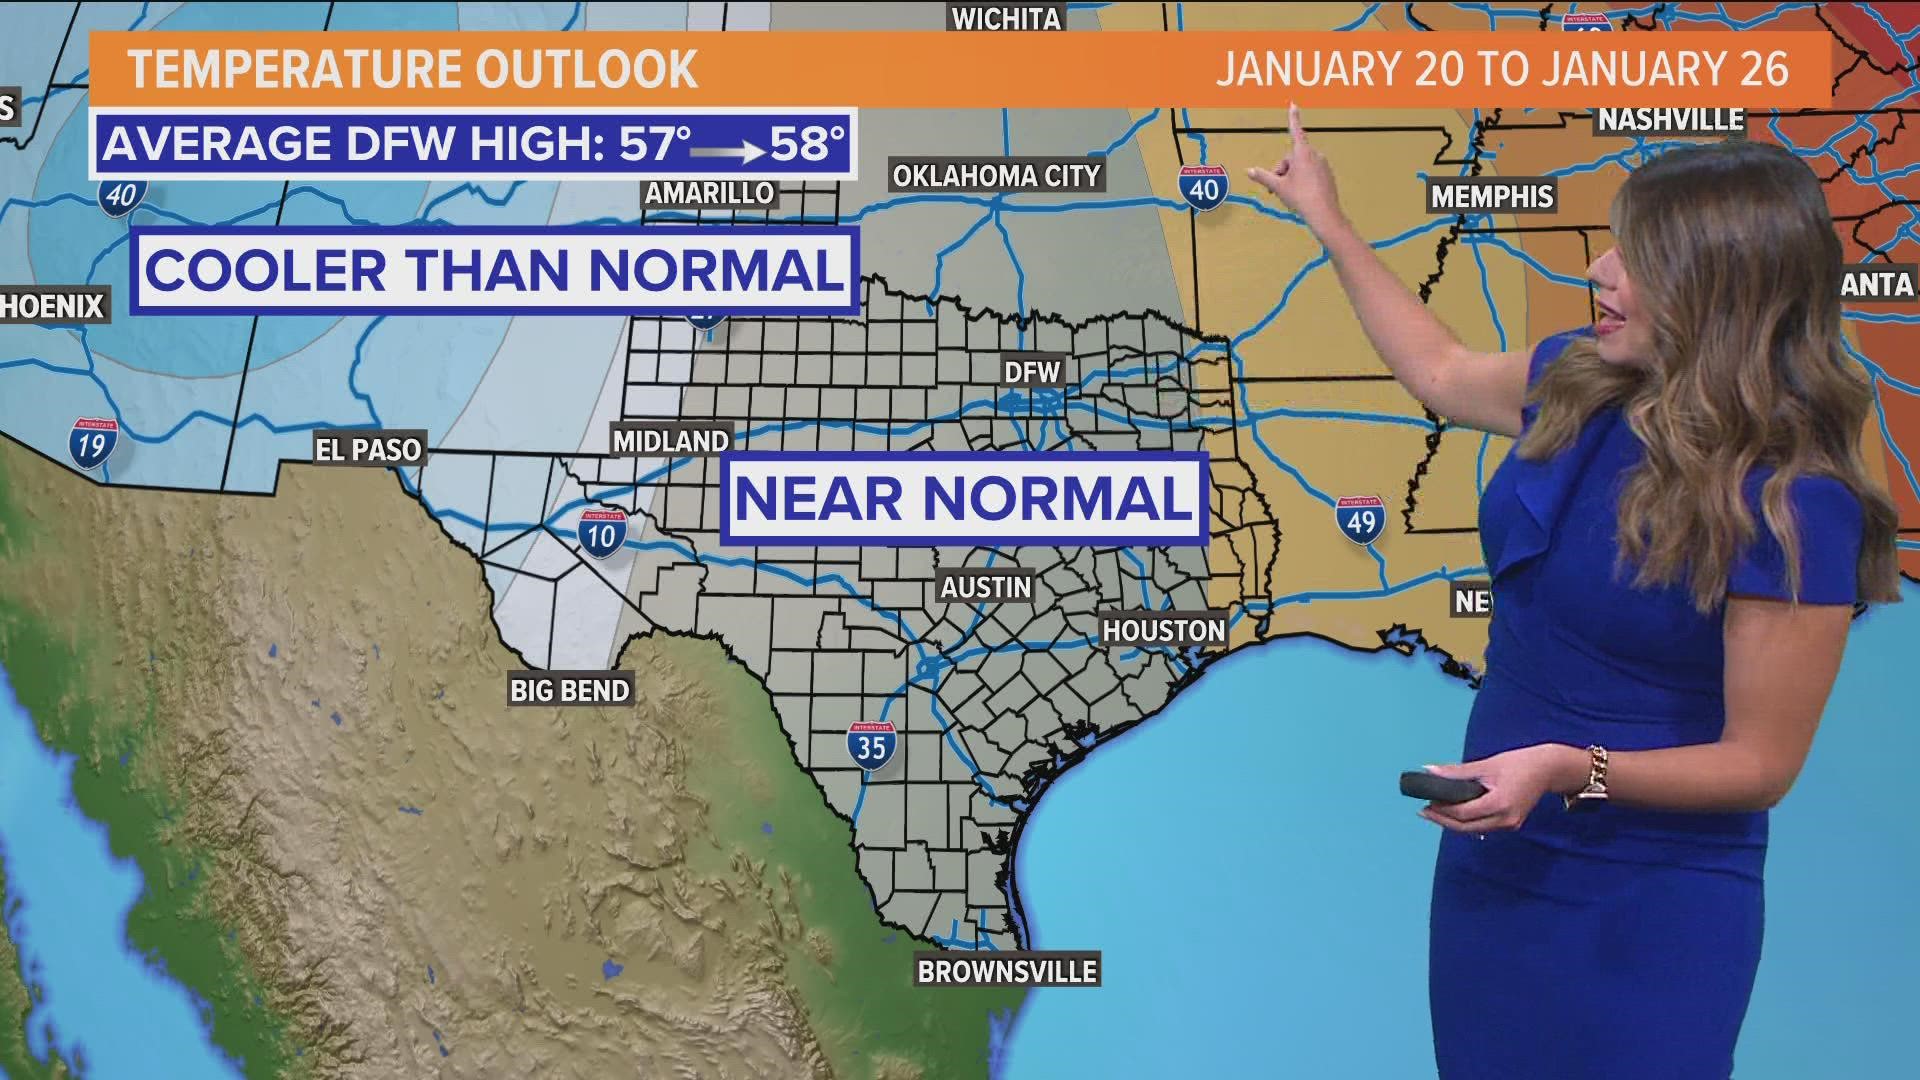 We can expect close-to-normal temps in the coming days, but we'll be getting less rain than usual.